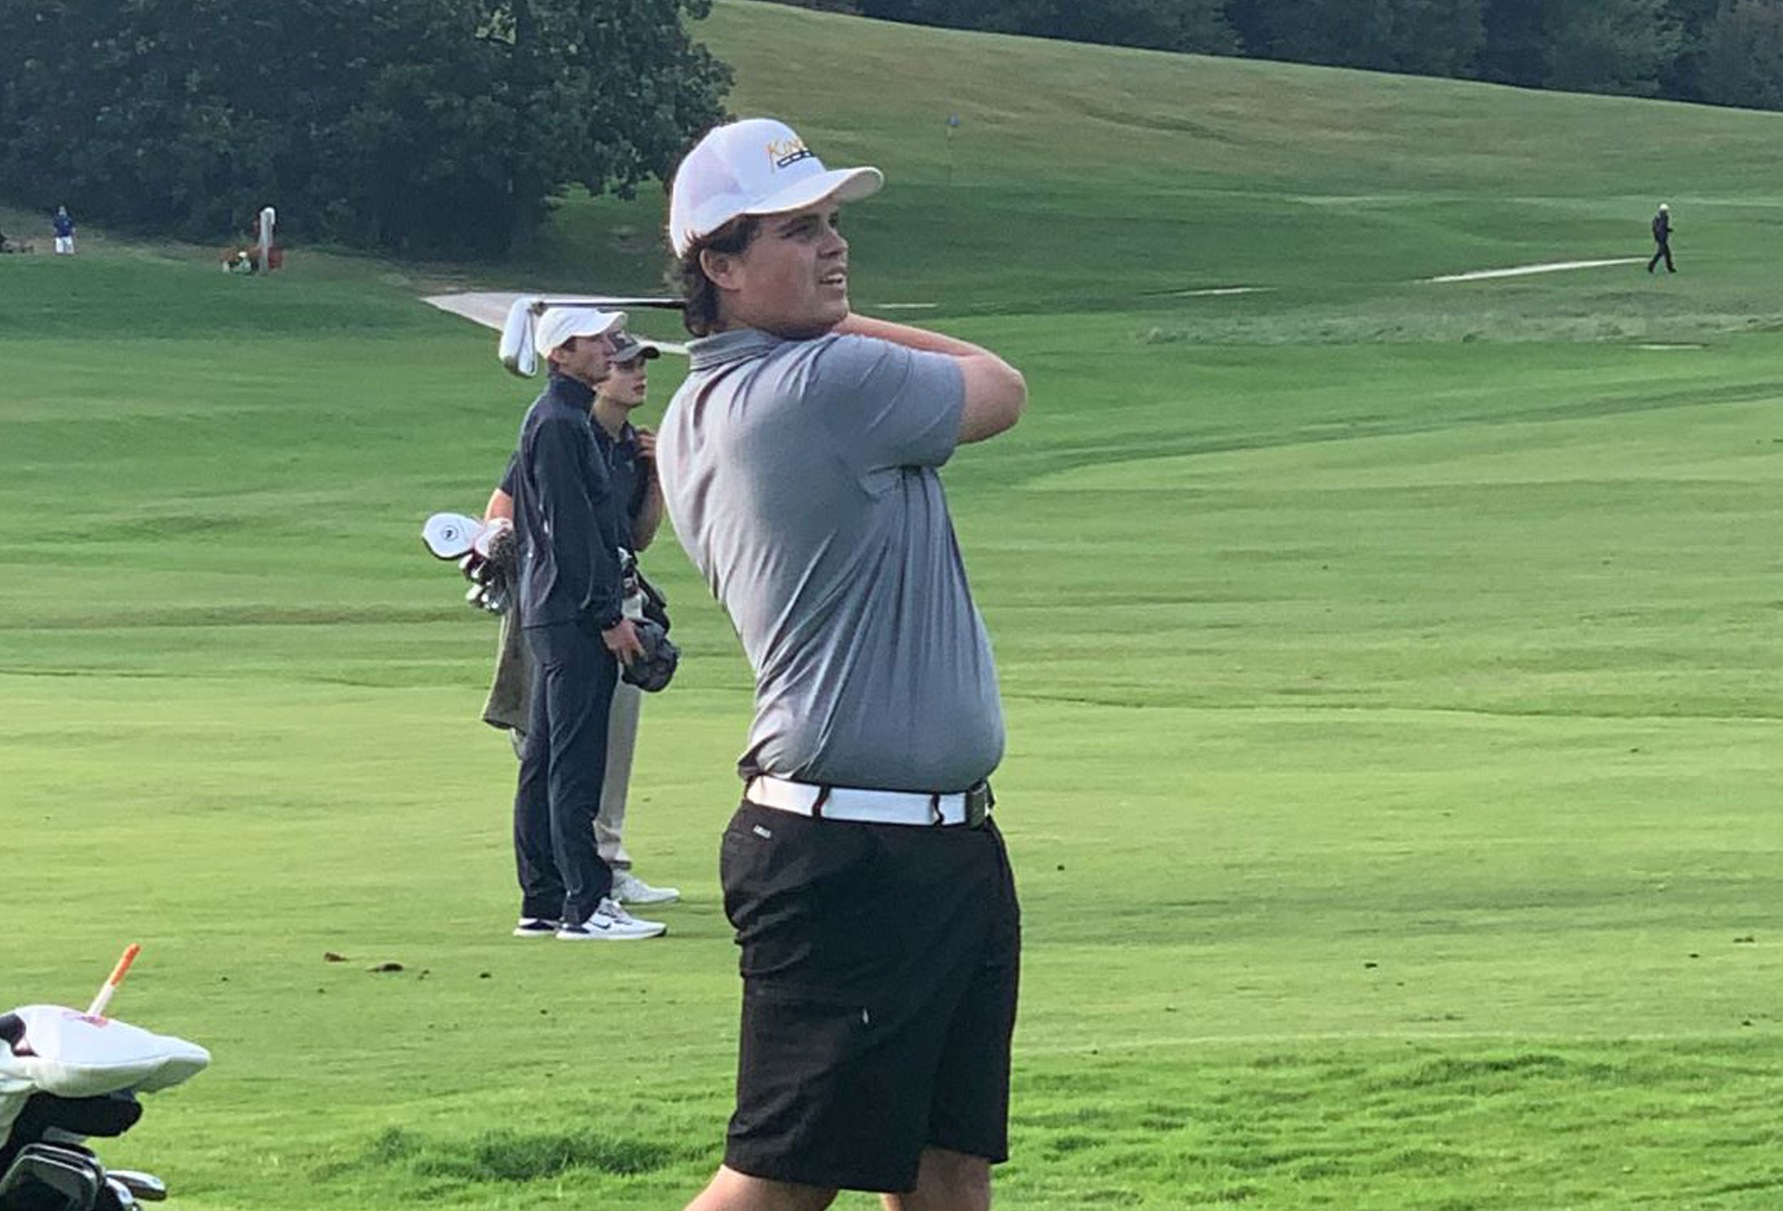 Vikings Open 2019 Campaign at 36th Annual Duke Nelson Tournament